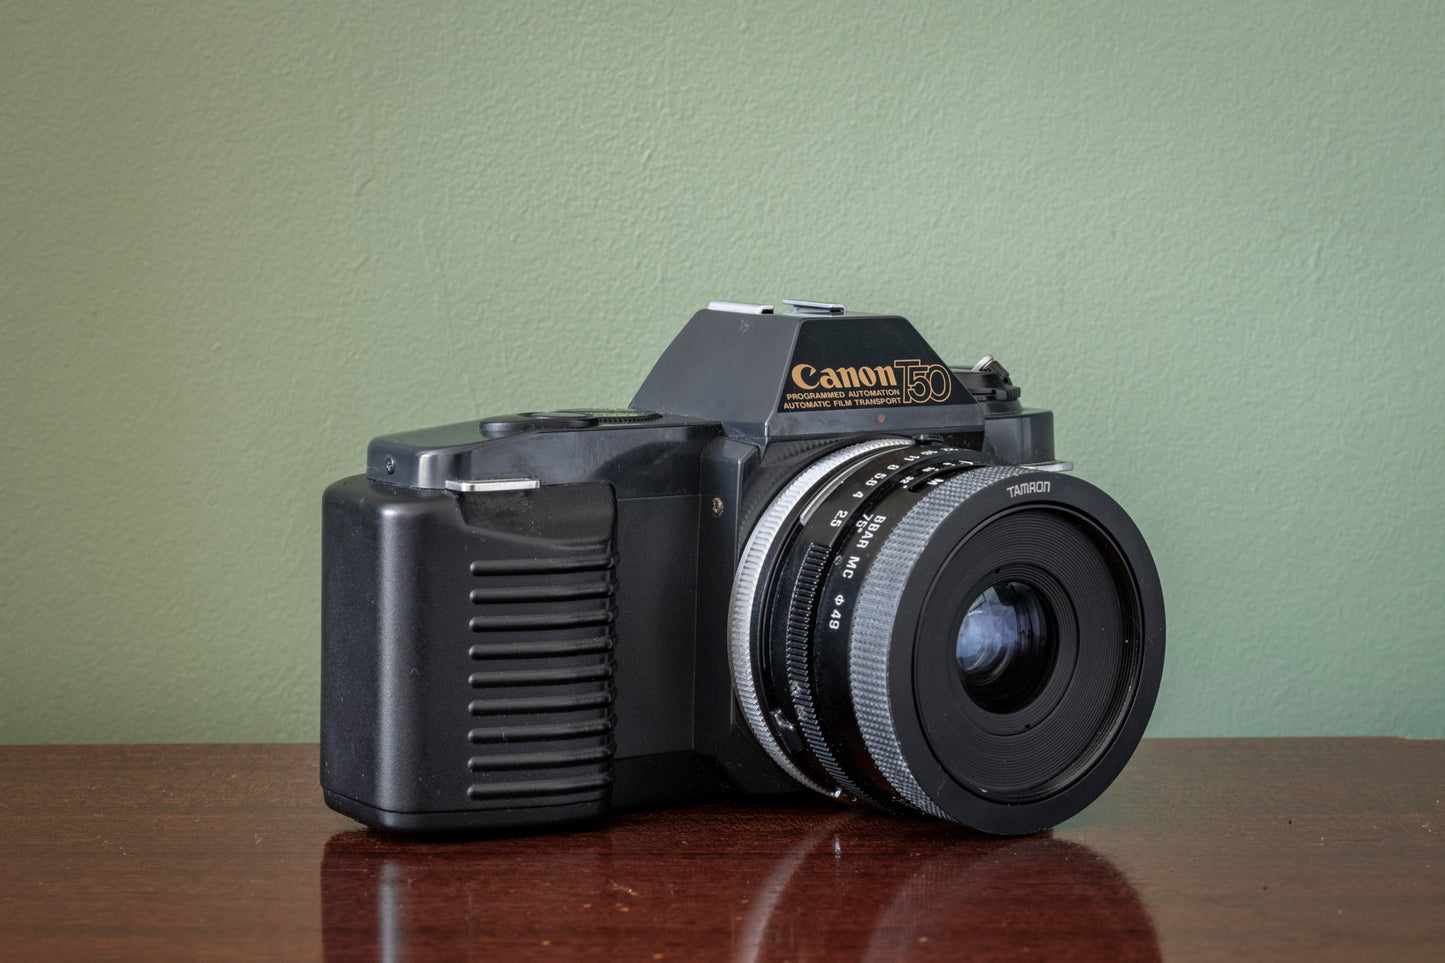 Canon T50 35mm SLR Film Camera with Tamron 28mm F2.5 Lens